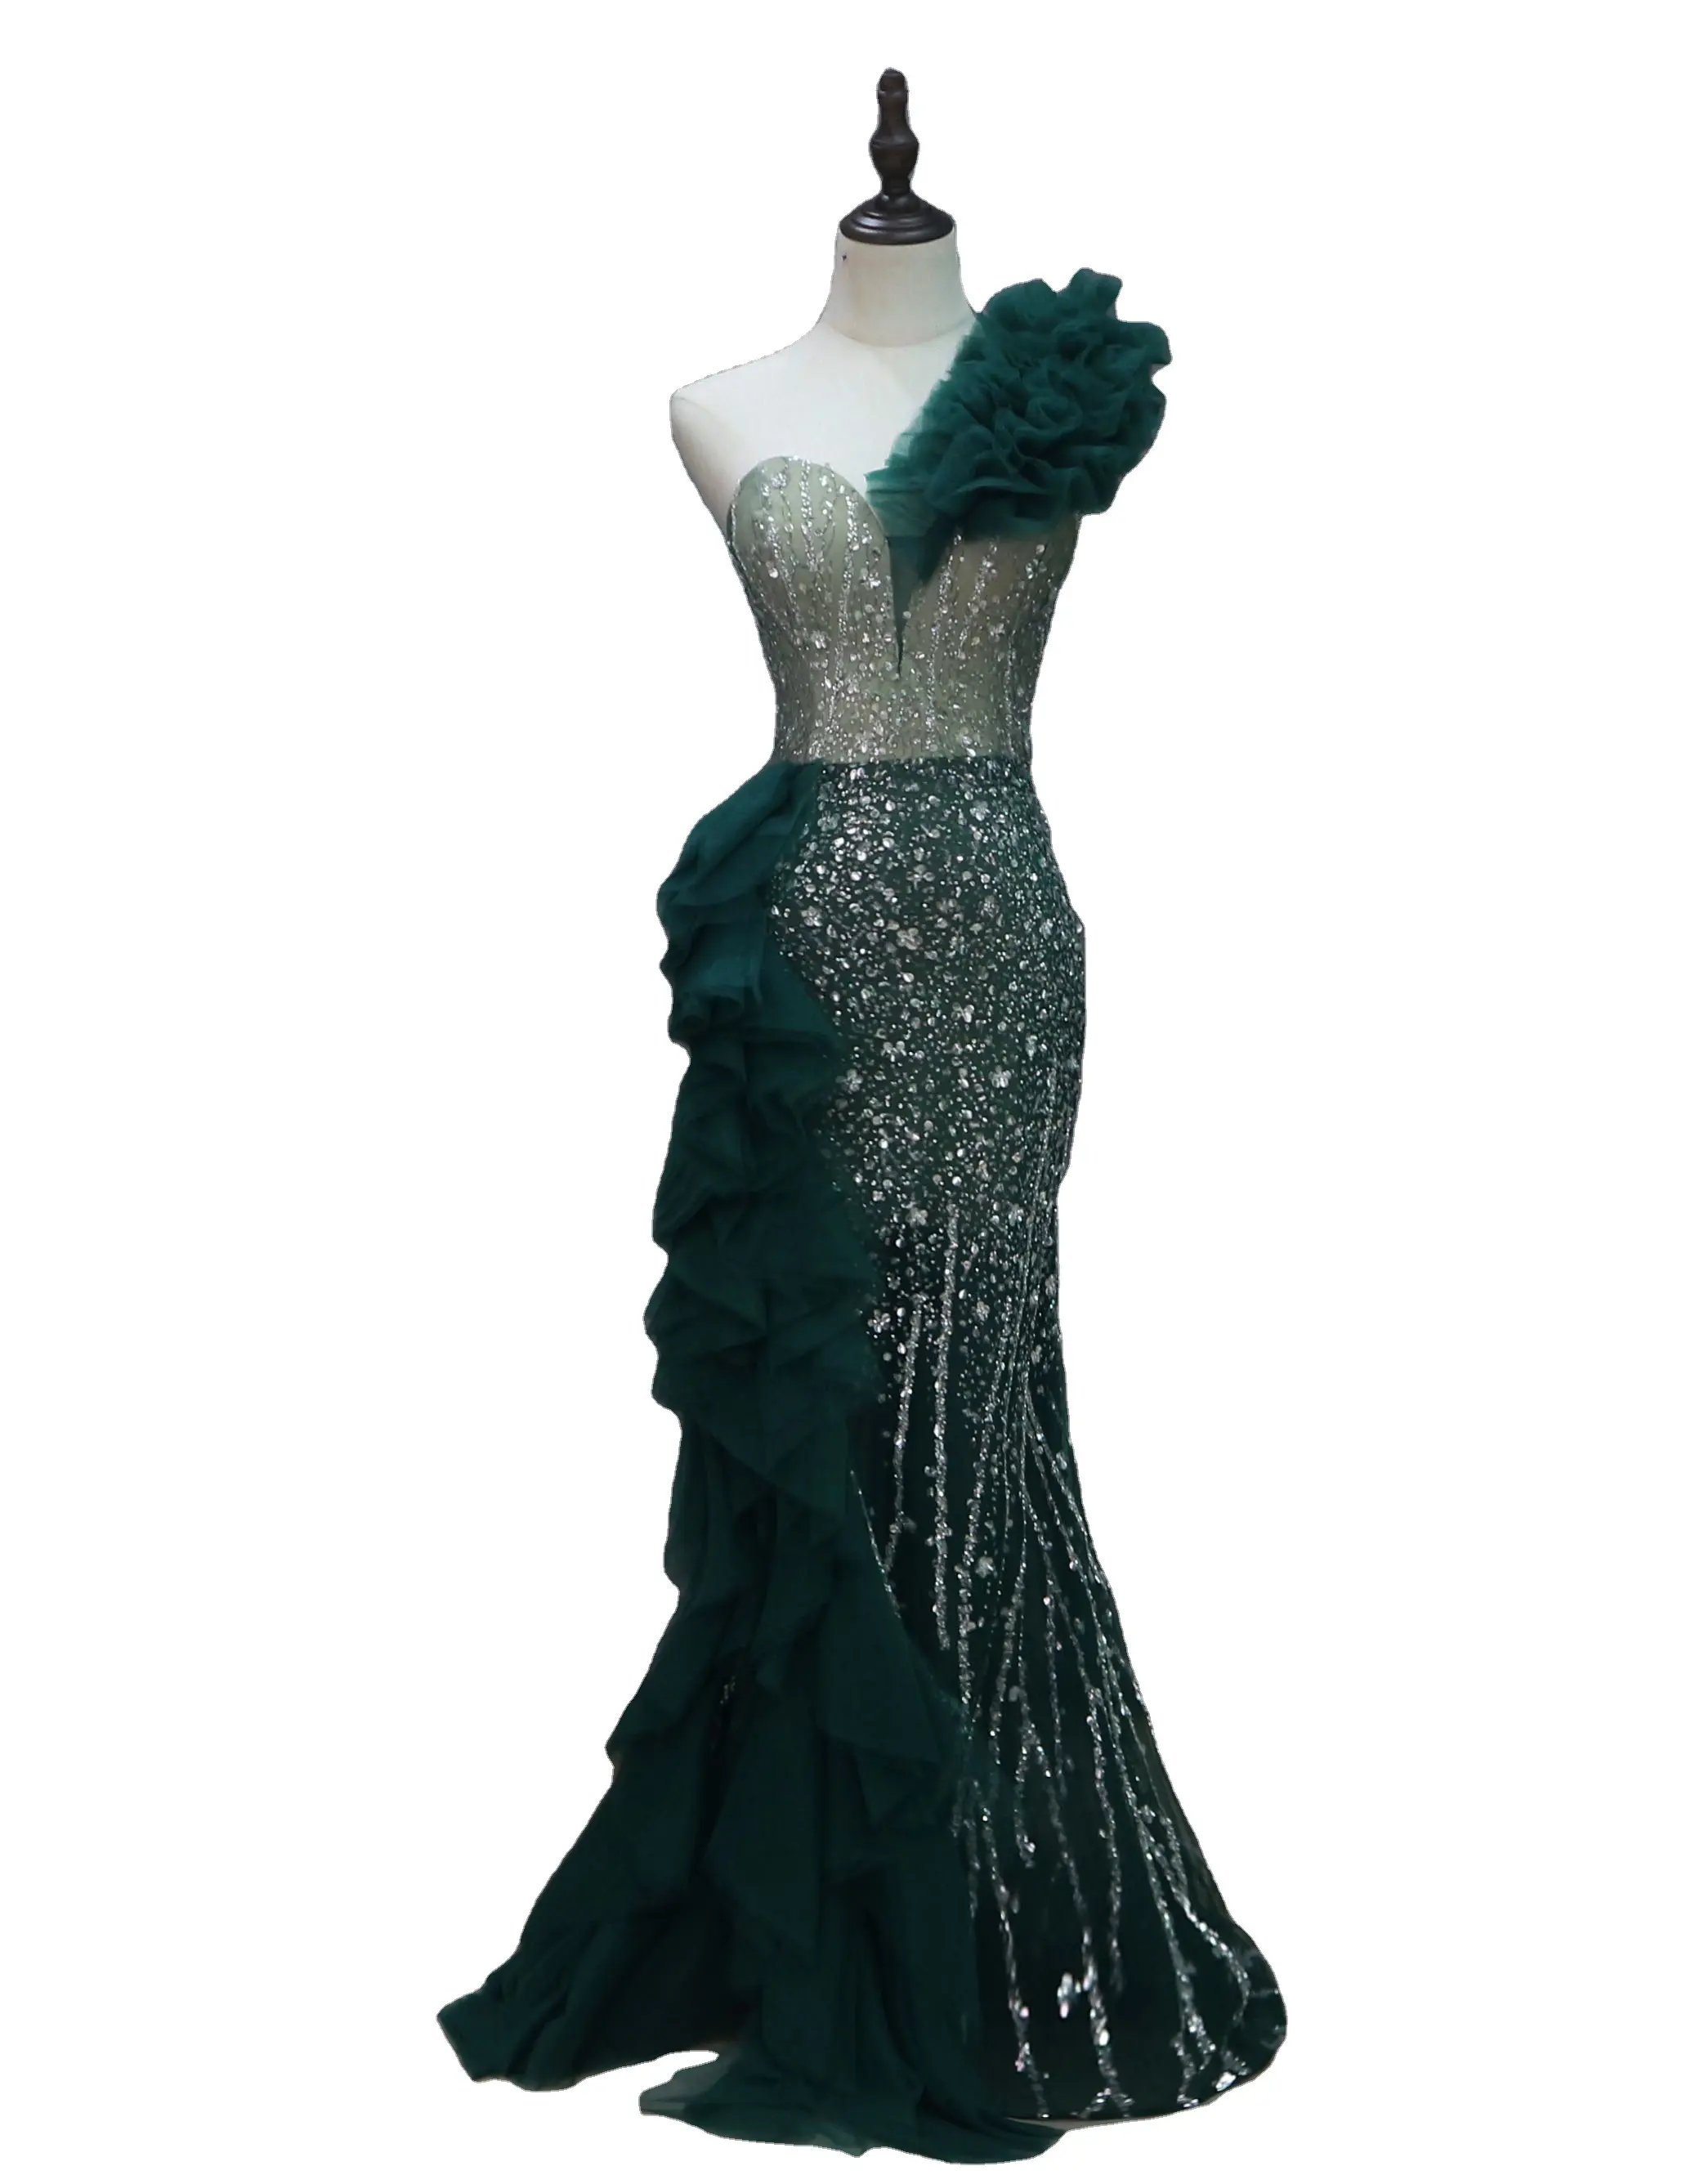 Bridalaffair Evening Gowns Green Sequin Ladies Formal Cocktail Party Ball plus size evening dress sexy short party dress